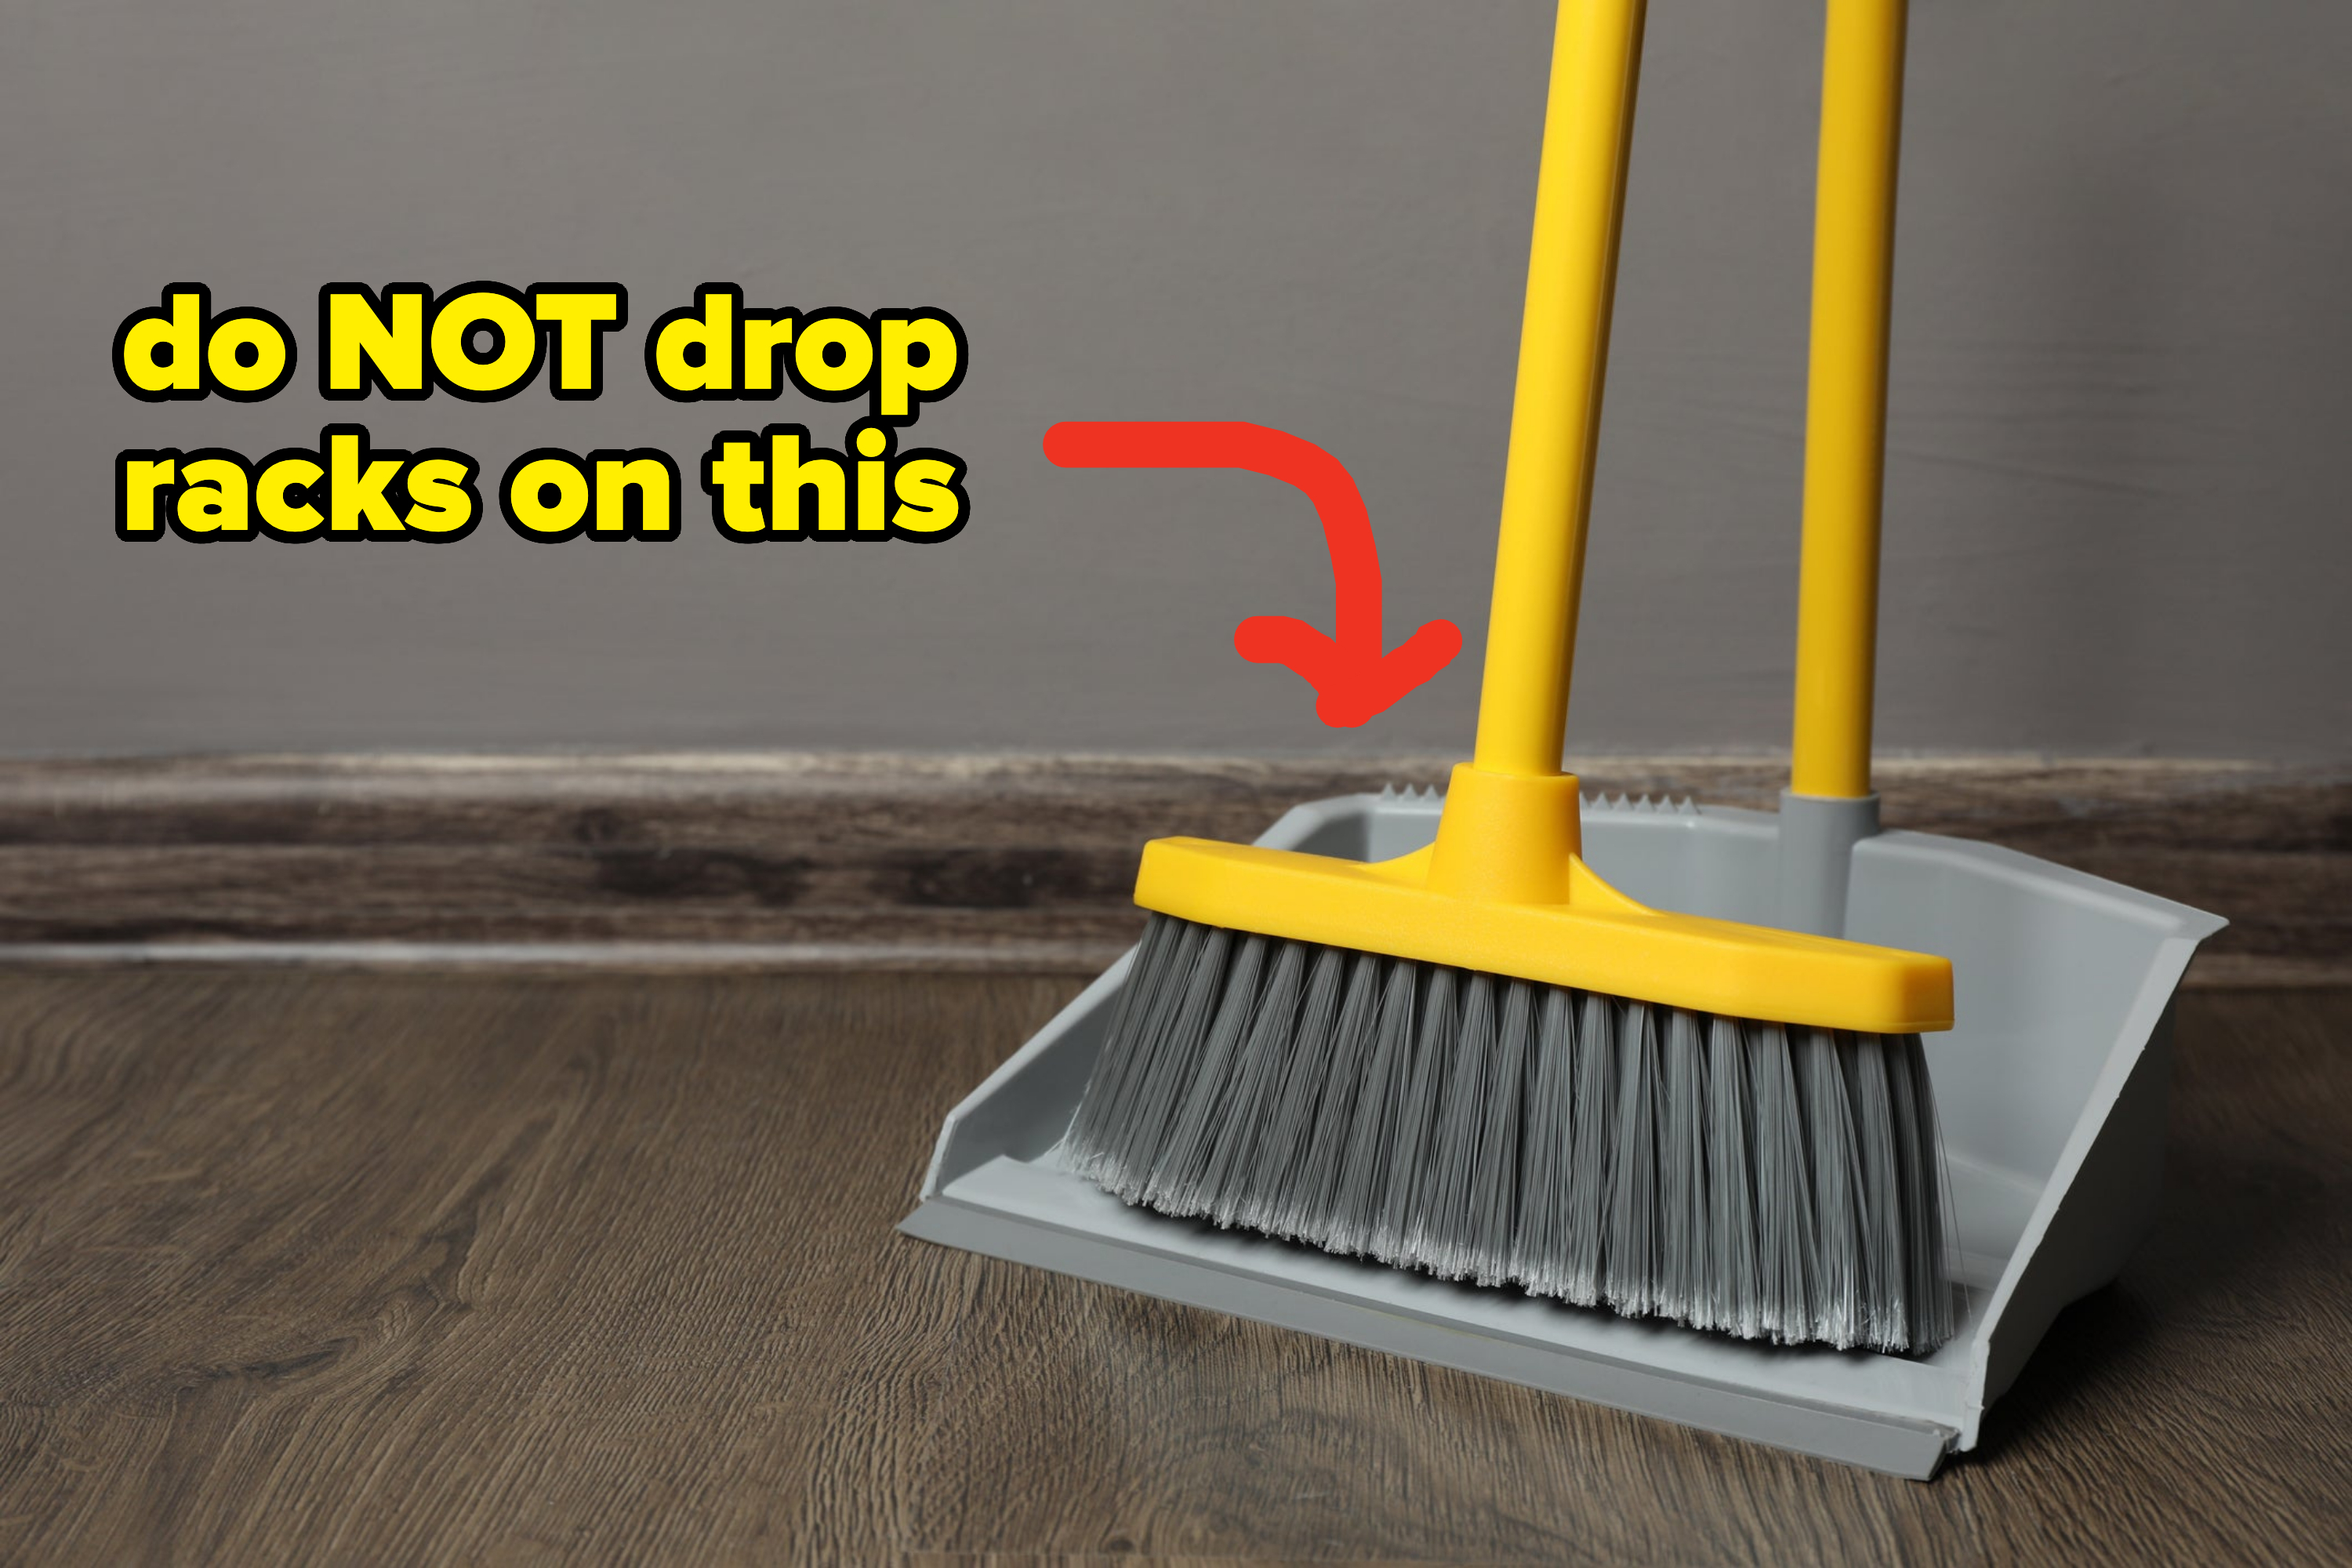 simple broom and pan with text, do not drop racks on this